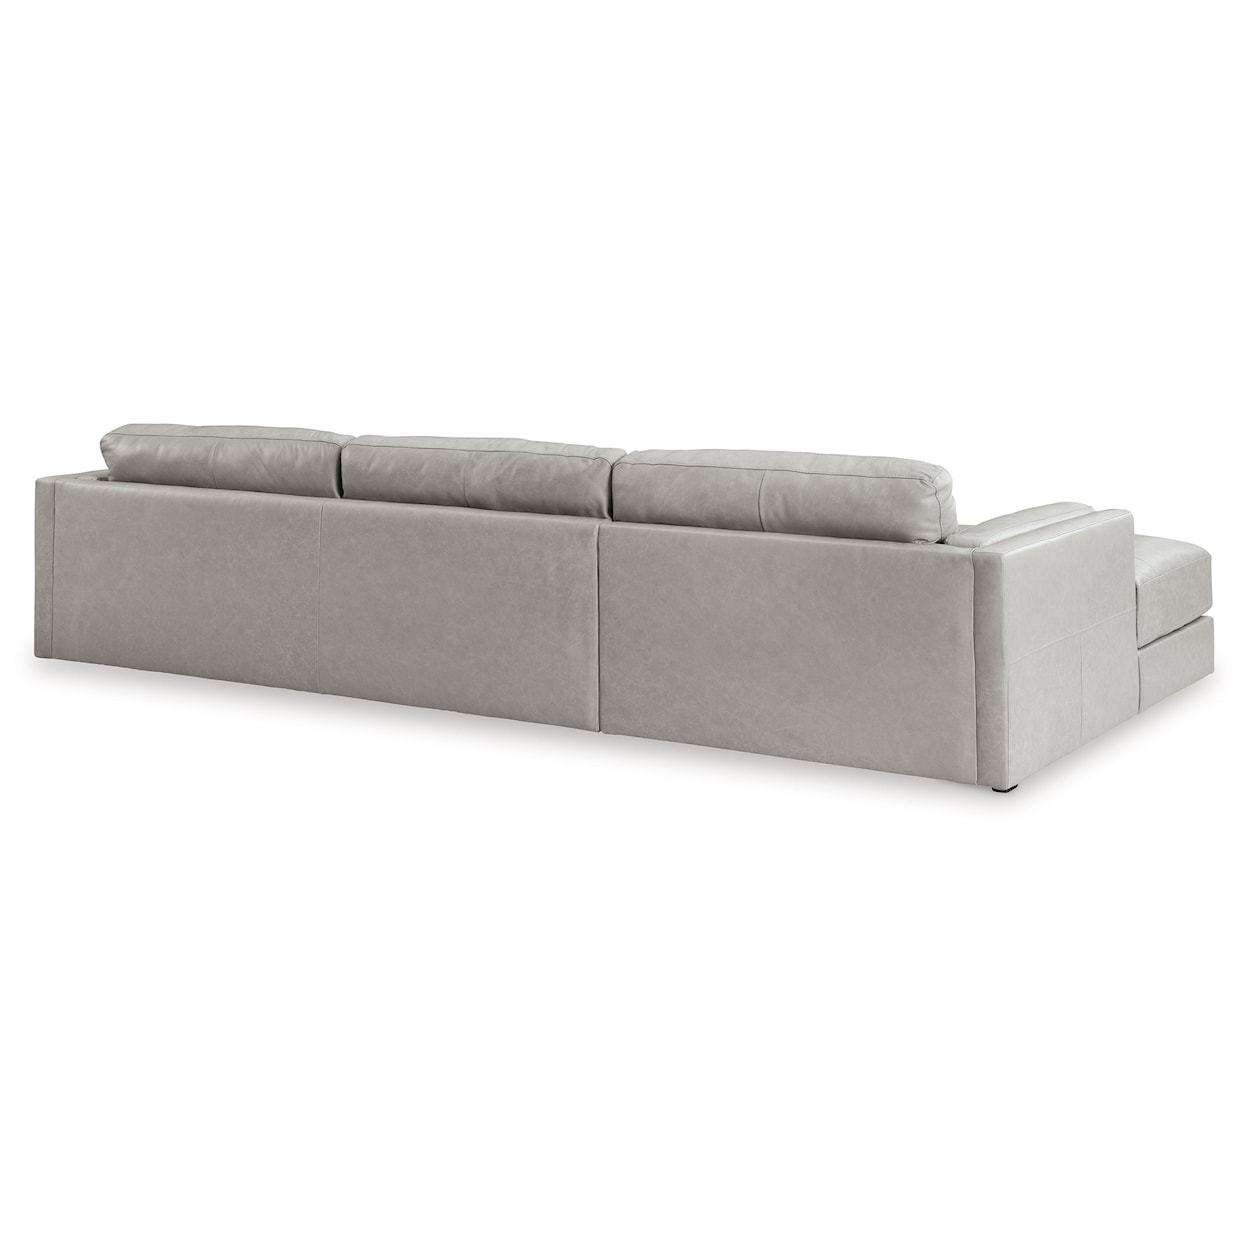 Signature Design Amiata 2-Piece Sectional With Chaise